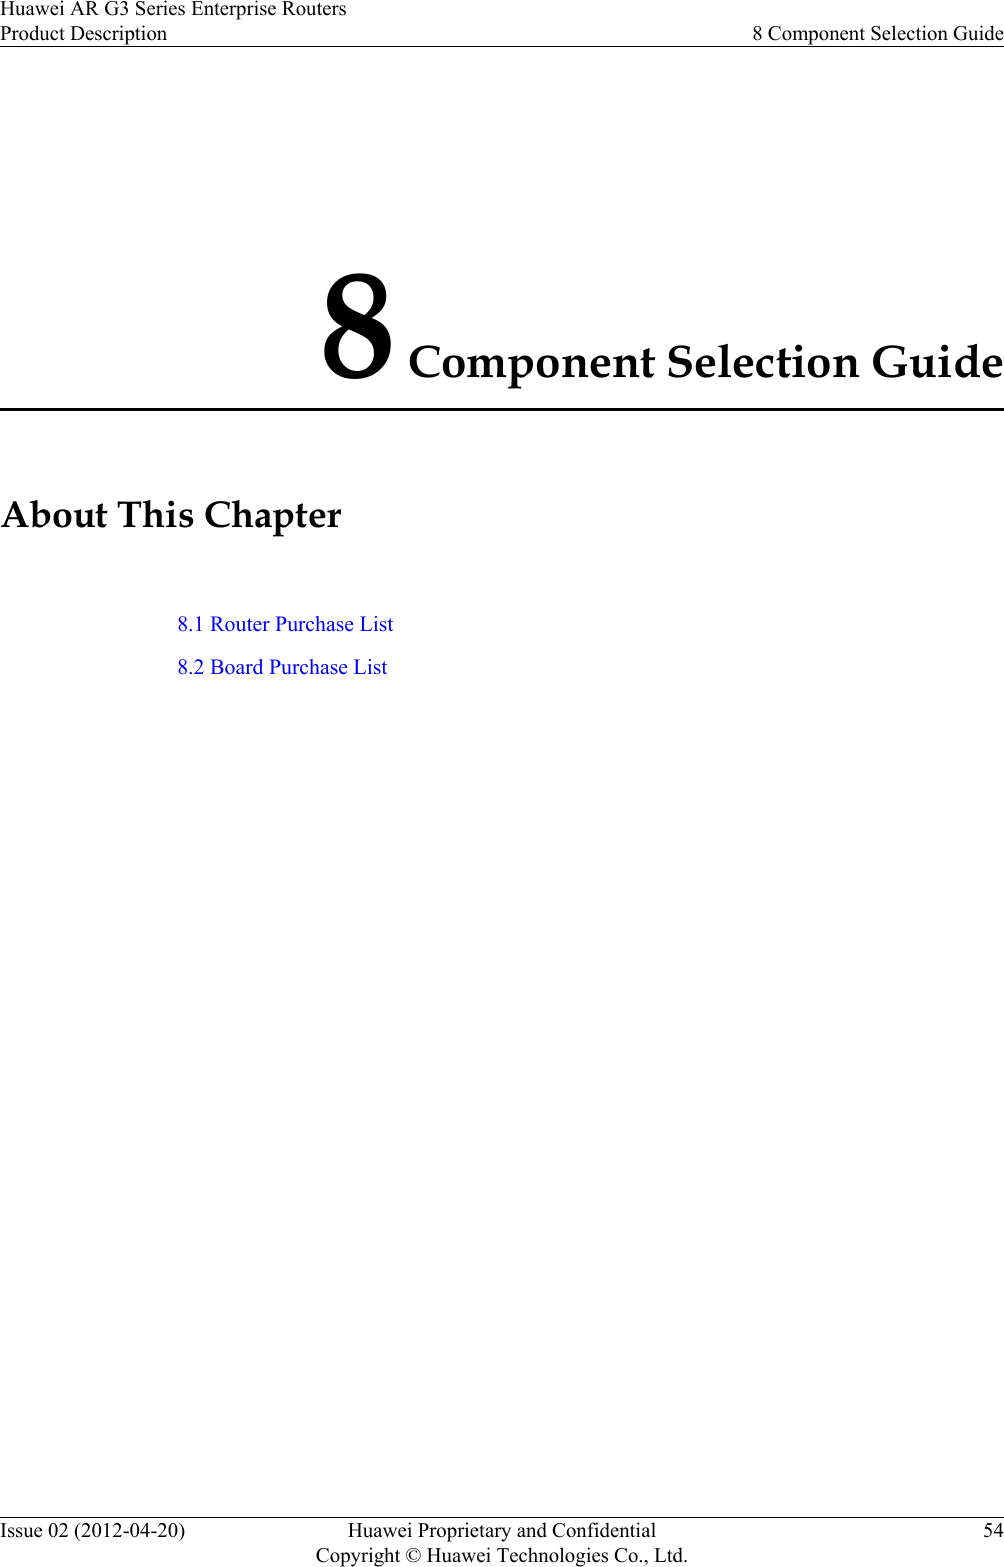 8 Component Selection GuideAbout This Chapter8.1 Router Purchase List8.2 Board Purchase ListHuawei AR G3 Series Enterprise RoutersProduct Description 8 Component Selection GuideIssue 02 (2012-04-20) Huawei Proprietary and ConfidentialCopyright © Huawei Technologies Co., Ltd.54